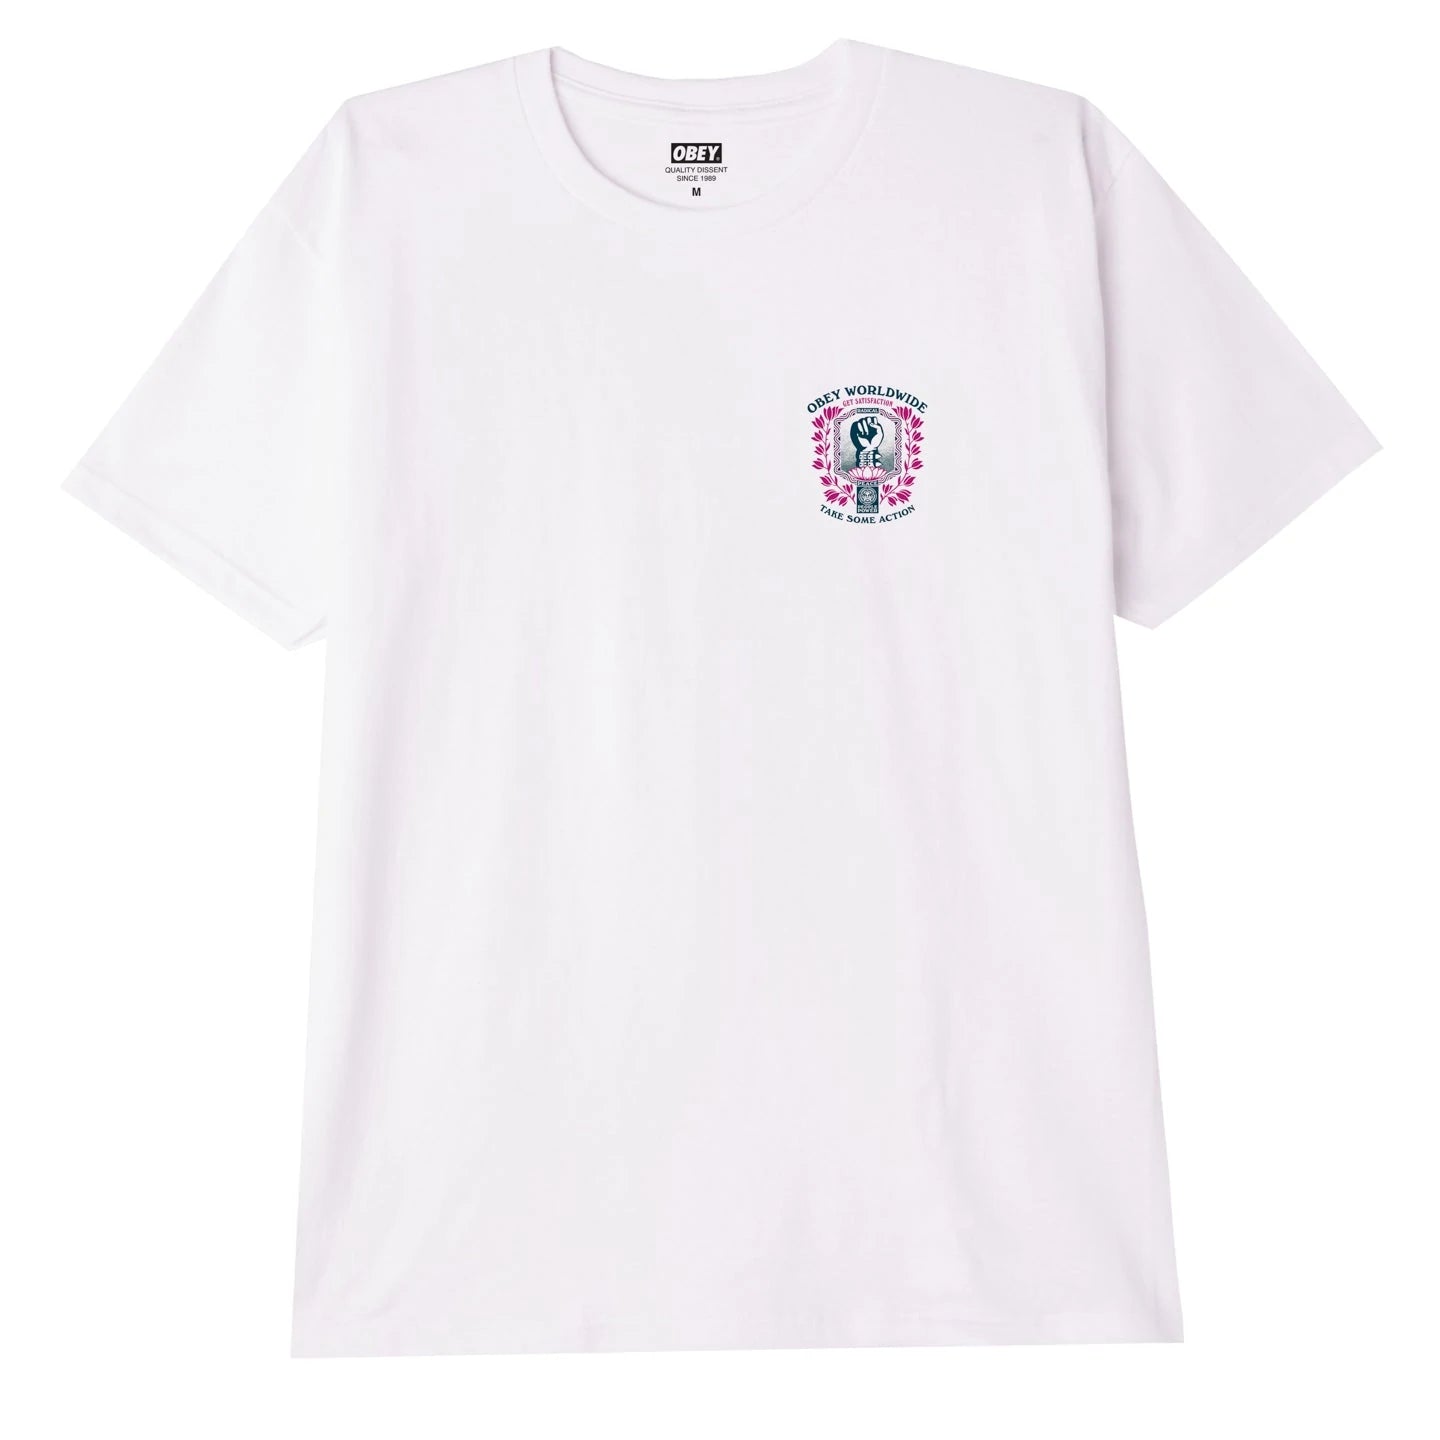 Obey Get Satisfaction T-shirt (White)